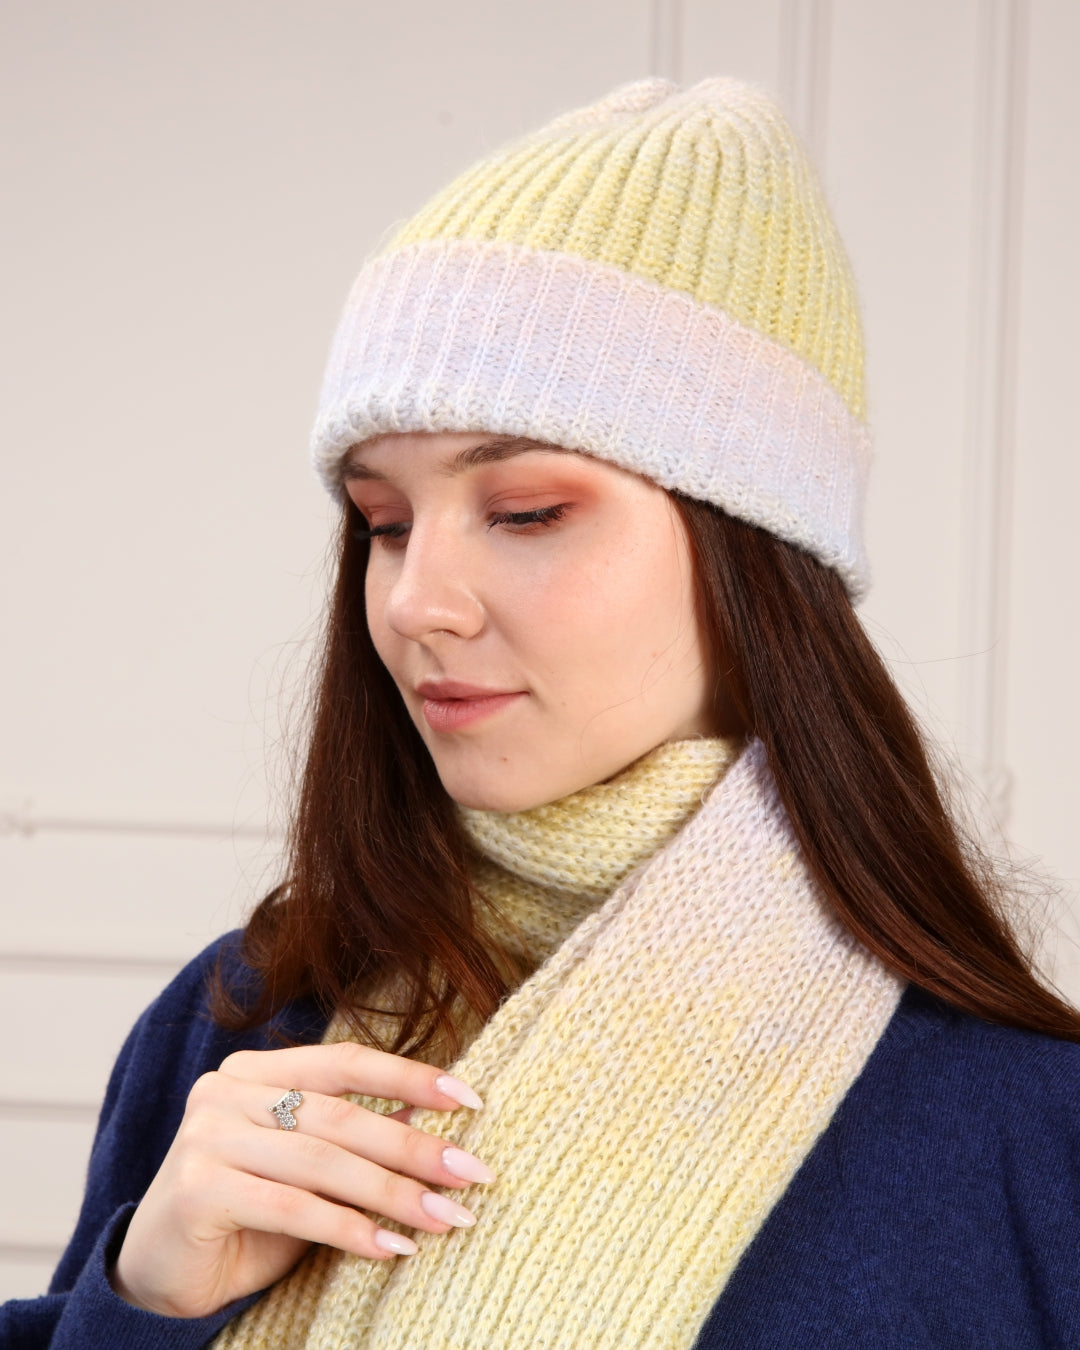 Knitted Beanie and Scarf Set - Women's Cozy Hat Scarf - Trending